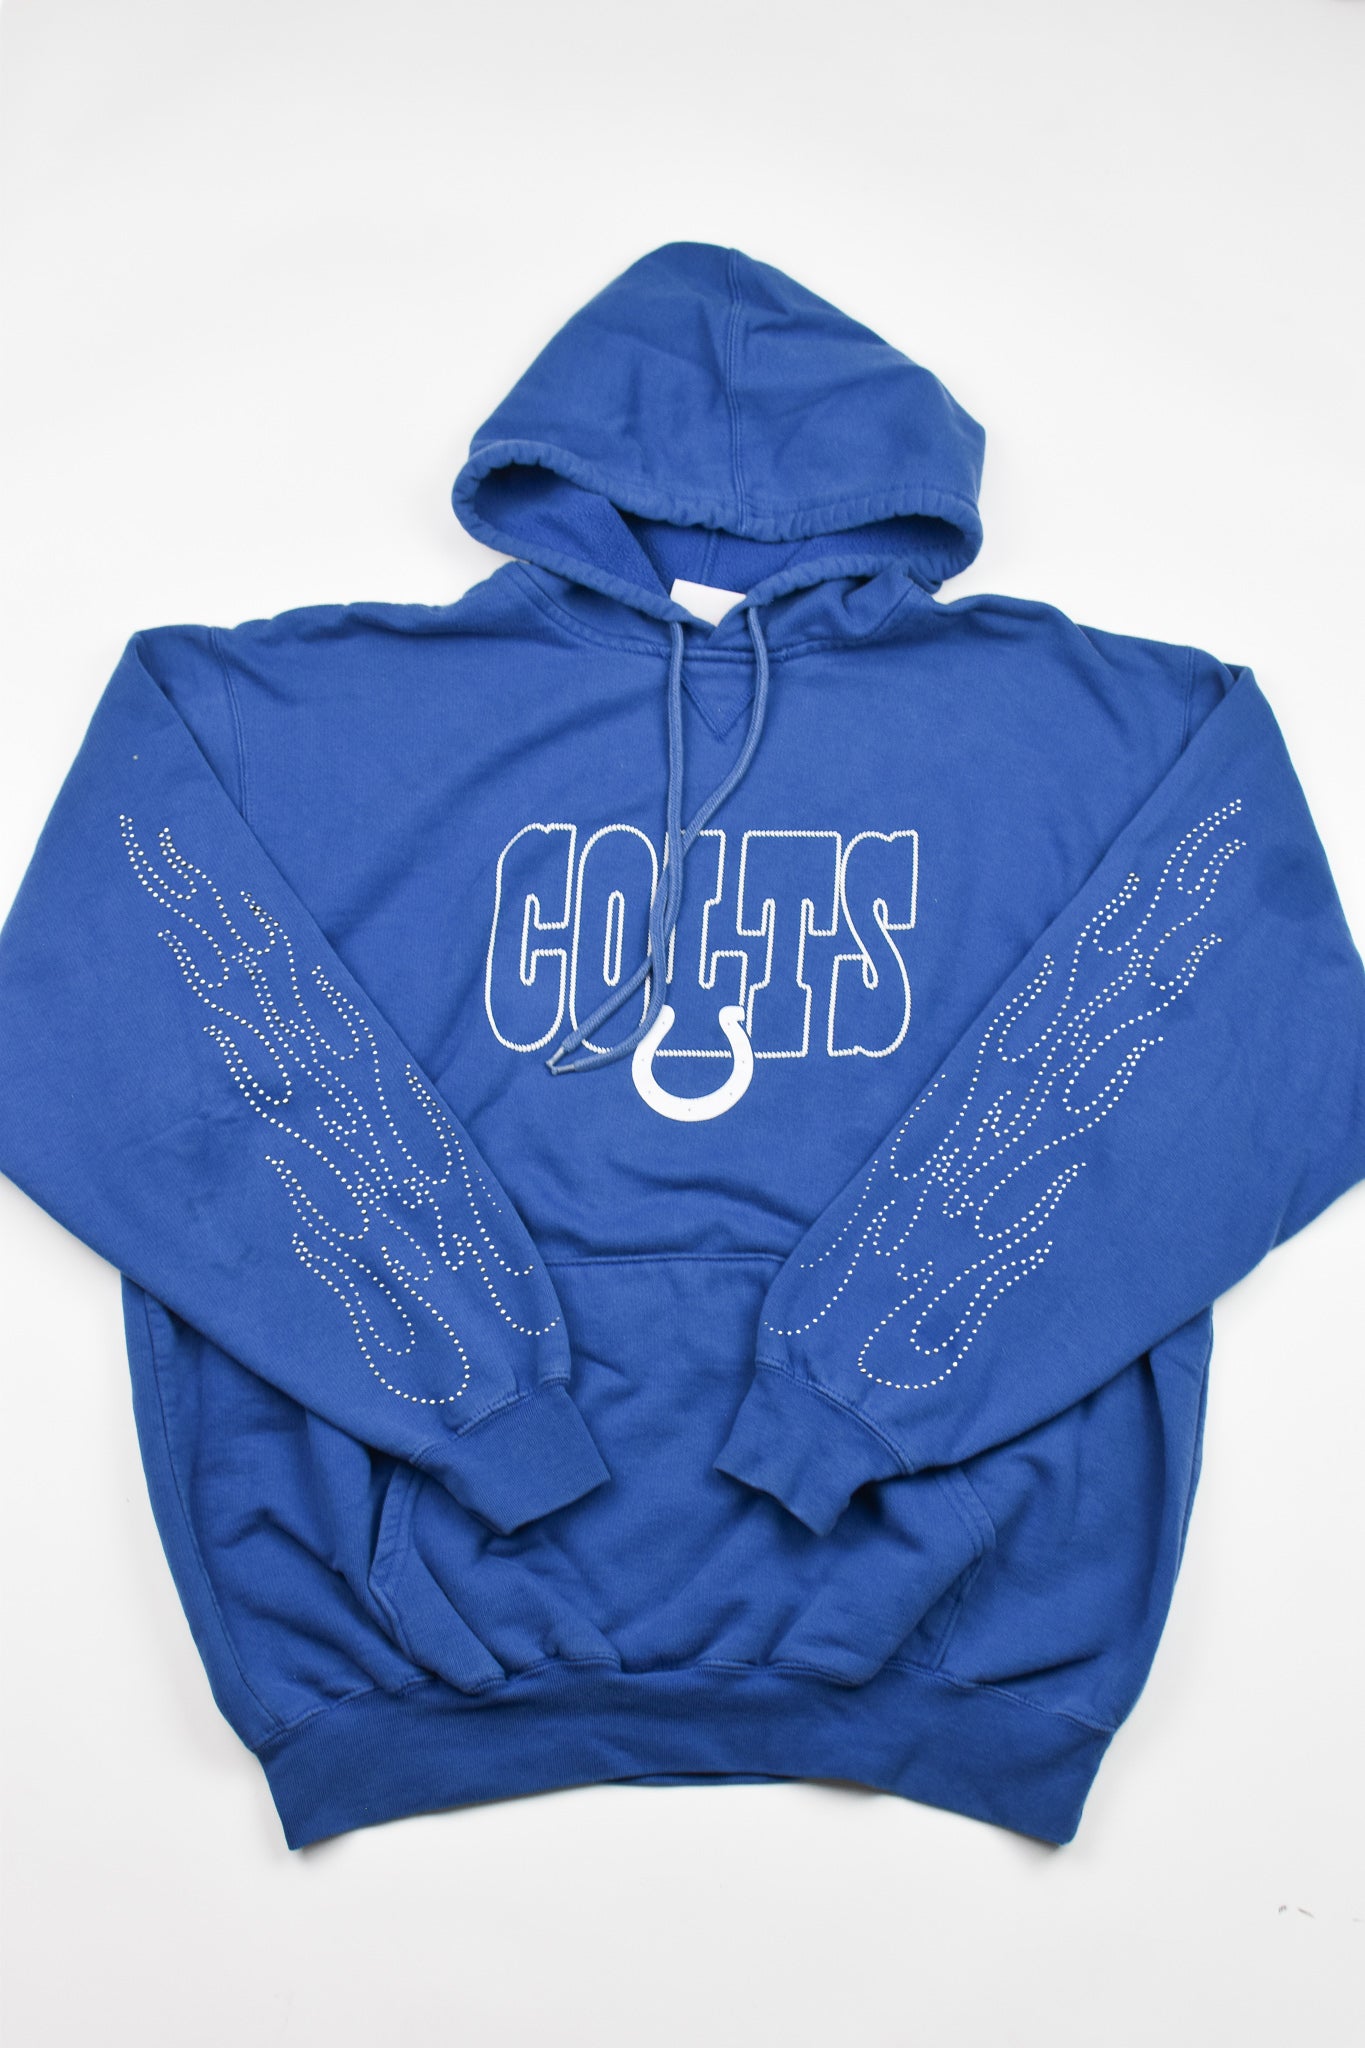 Upcycled Colts Flame Sweatshirt